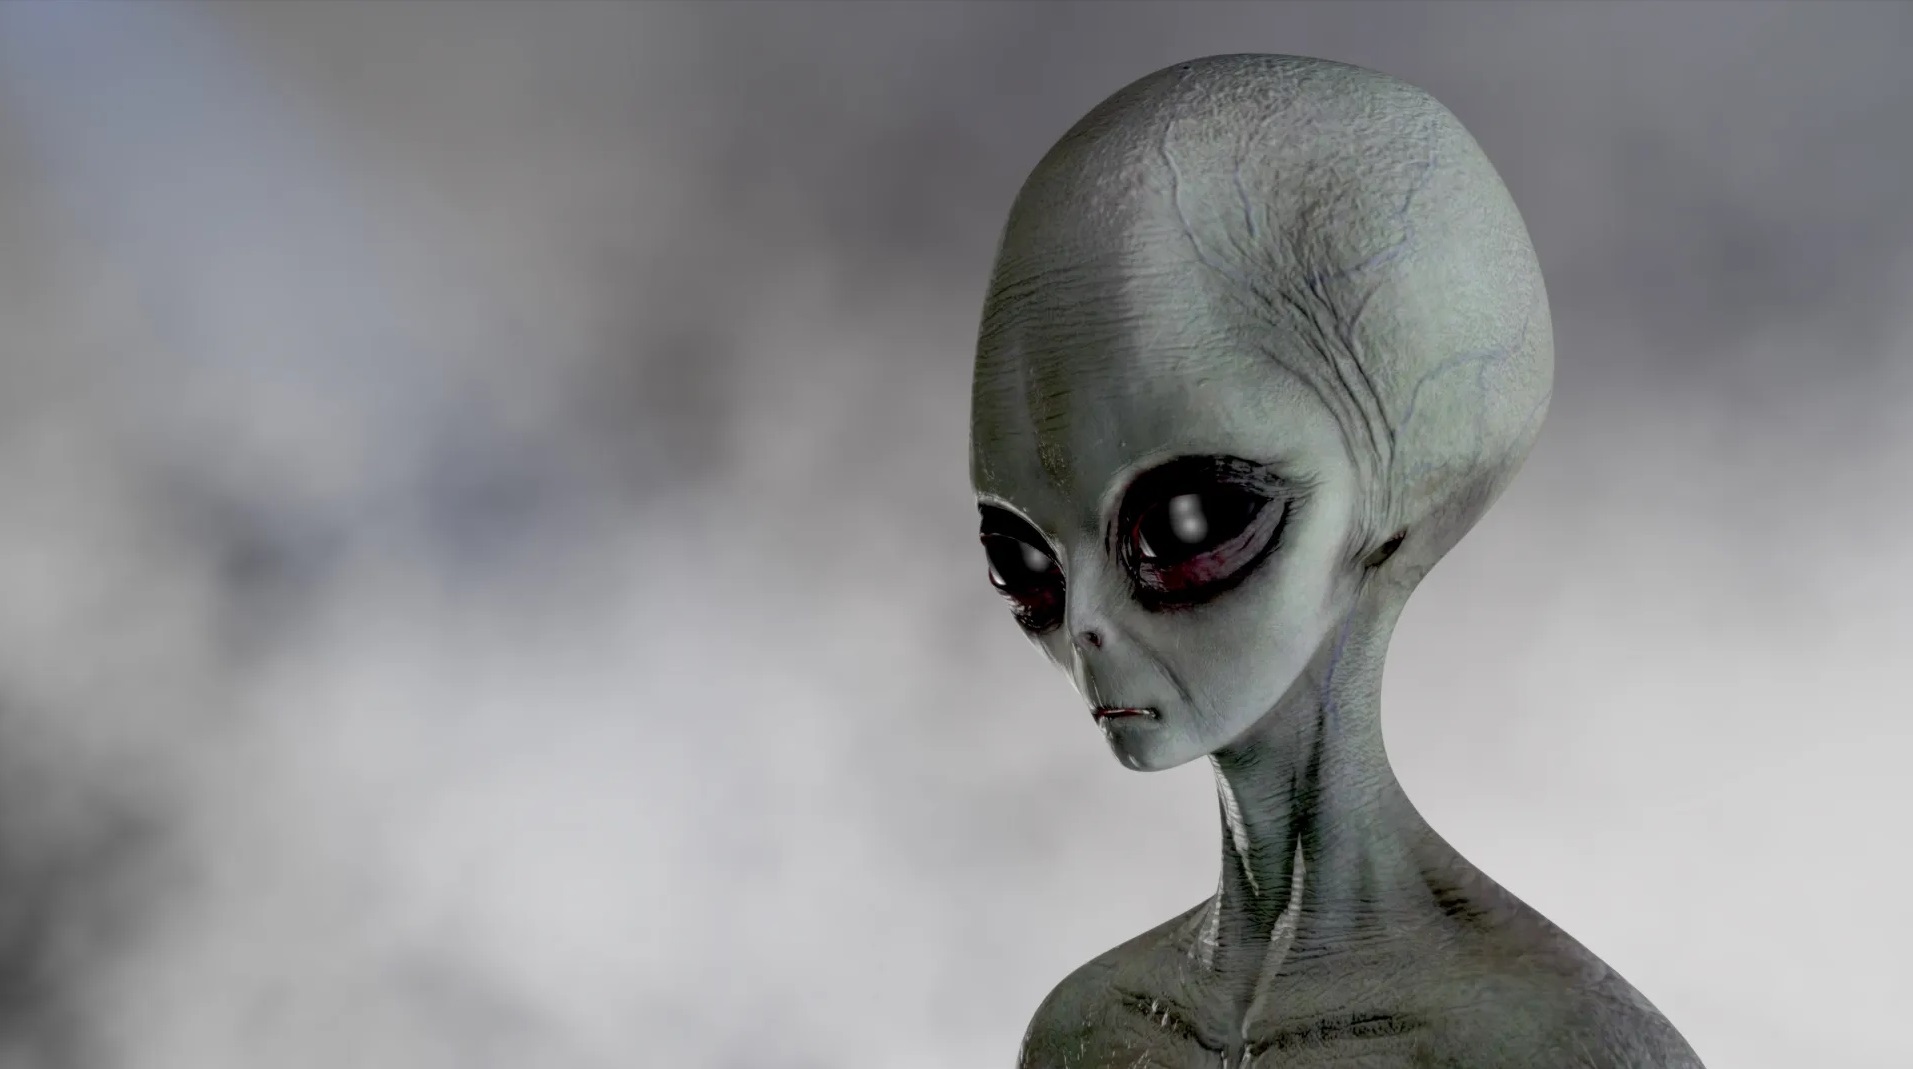 Former intelligence official assured that the United States has vehicles of extraterrestrial origin in its possession